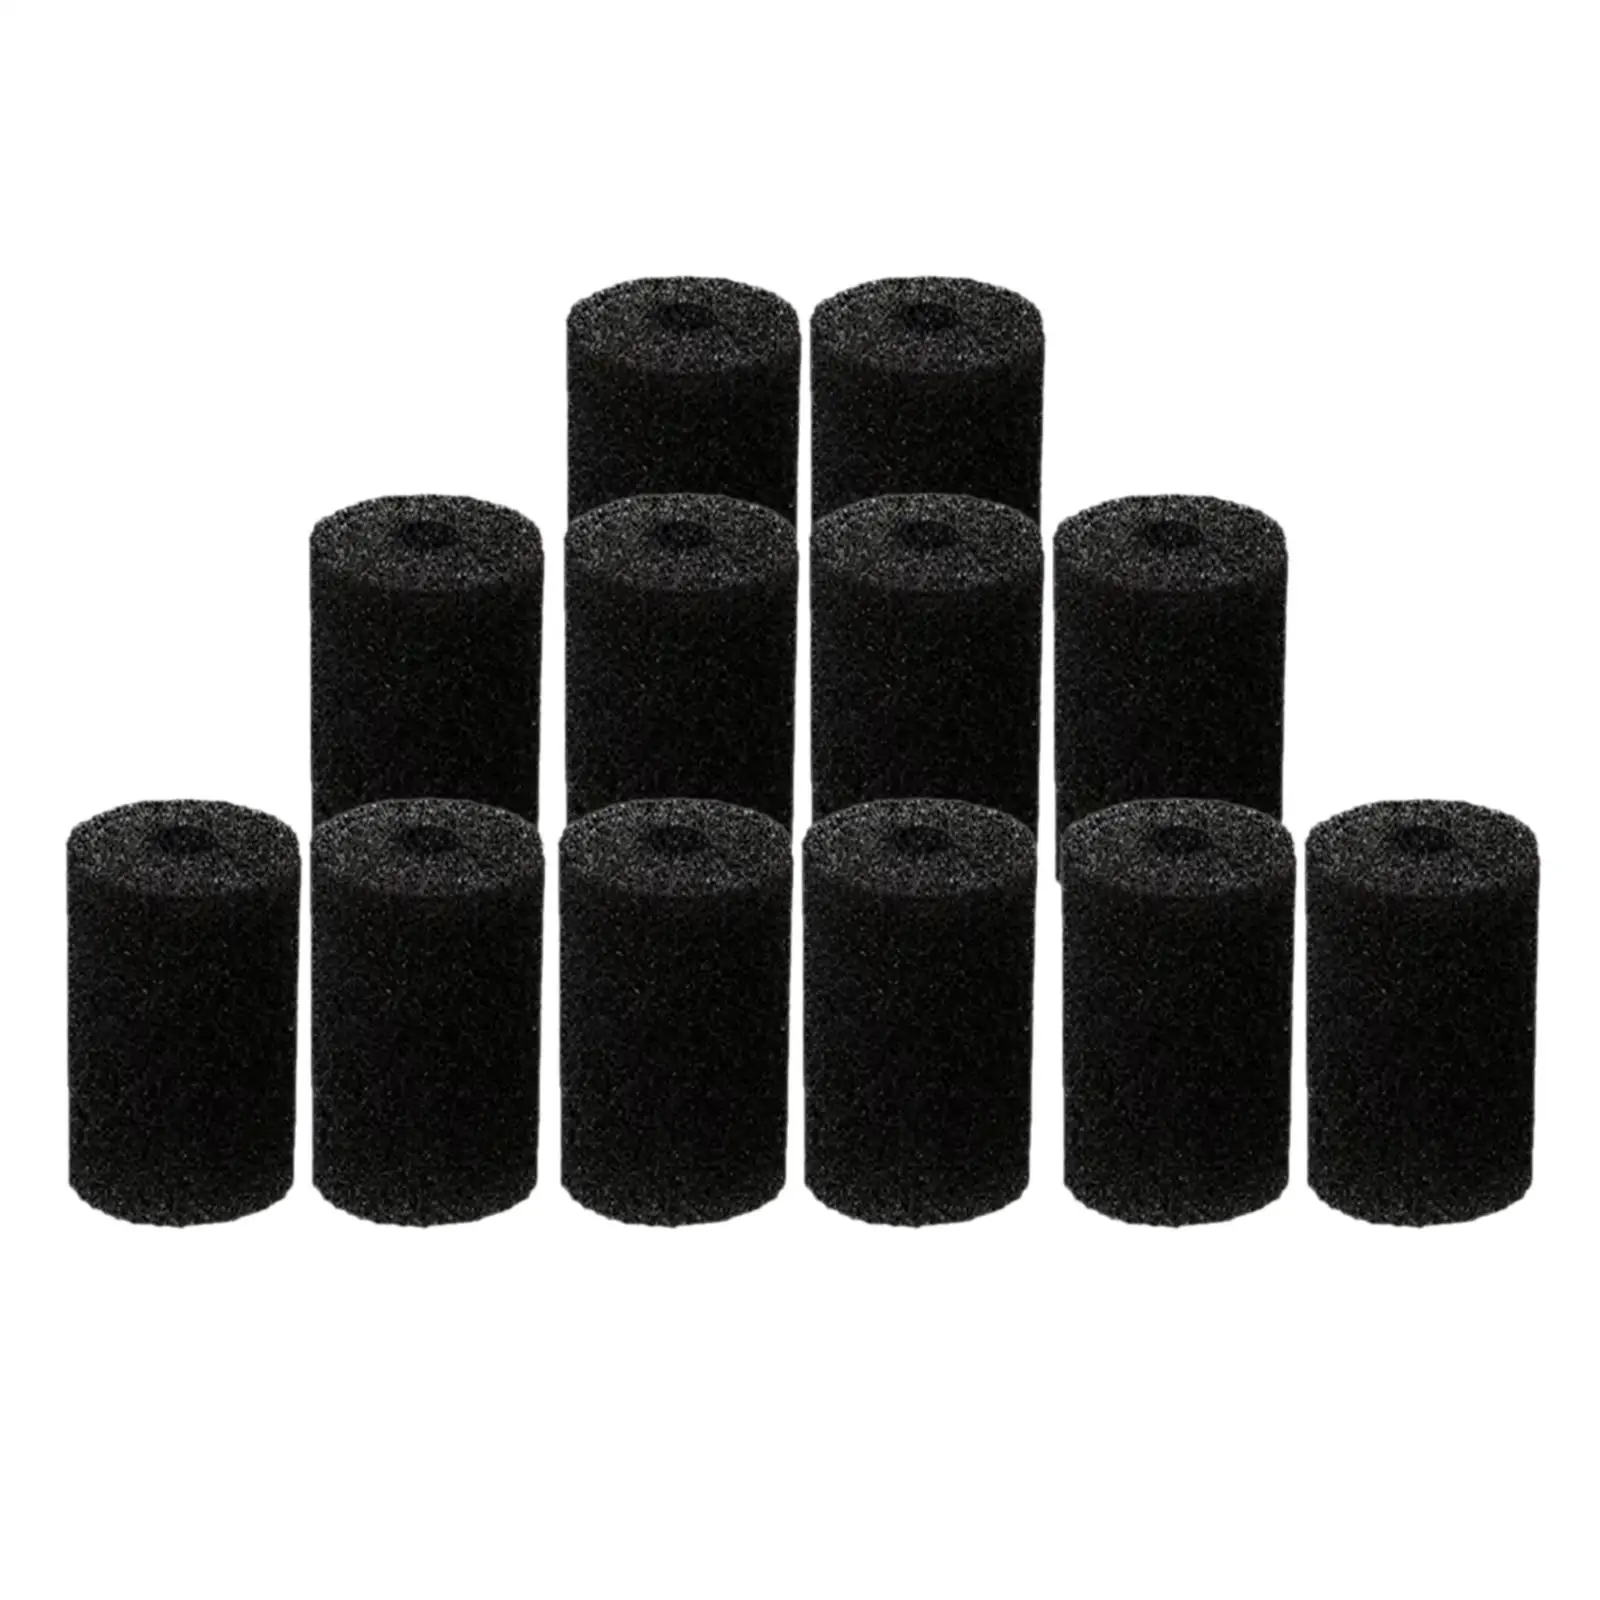 12x Swimming Pool Cleaner Sweep Hose Scrubber Flexible Cleaning Tools Durable Easy to Install High Density Supply Black